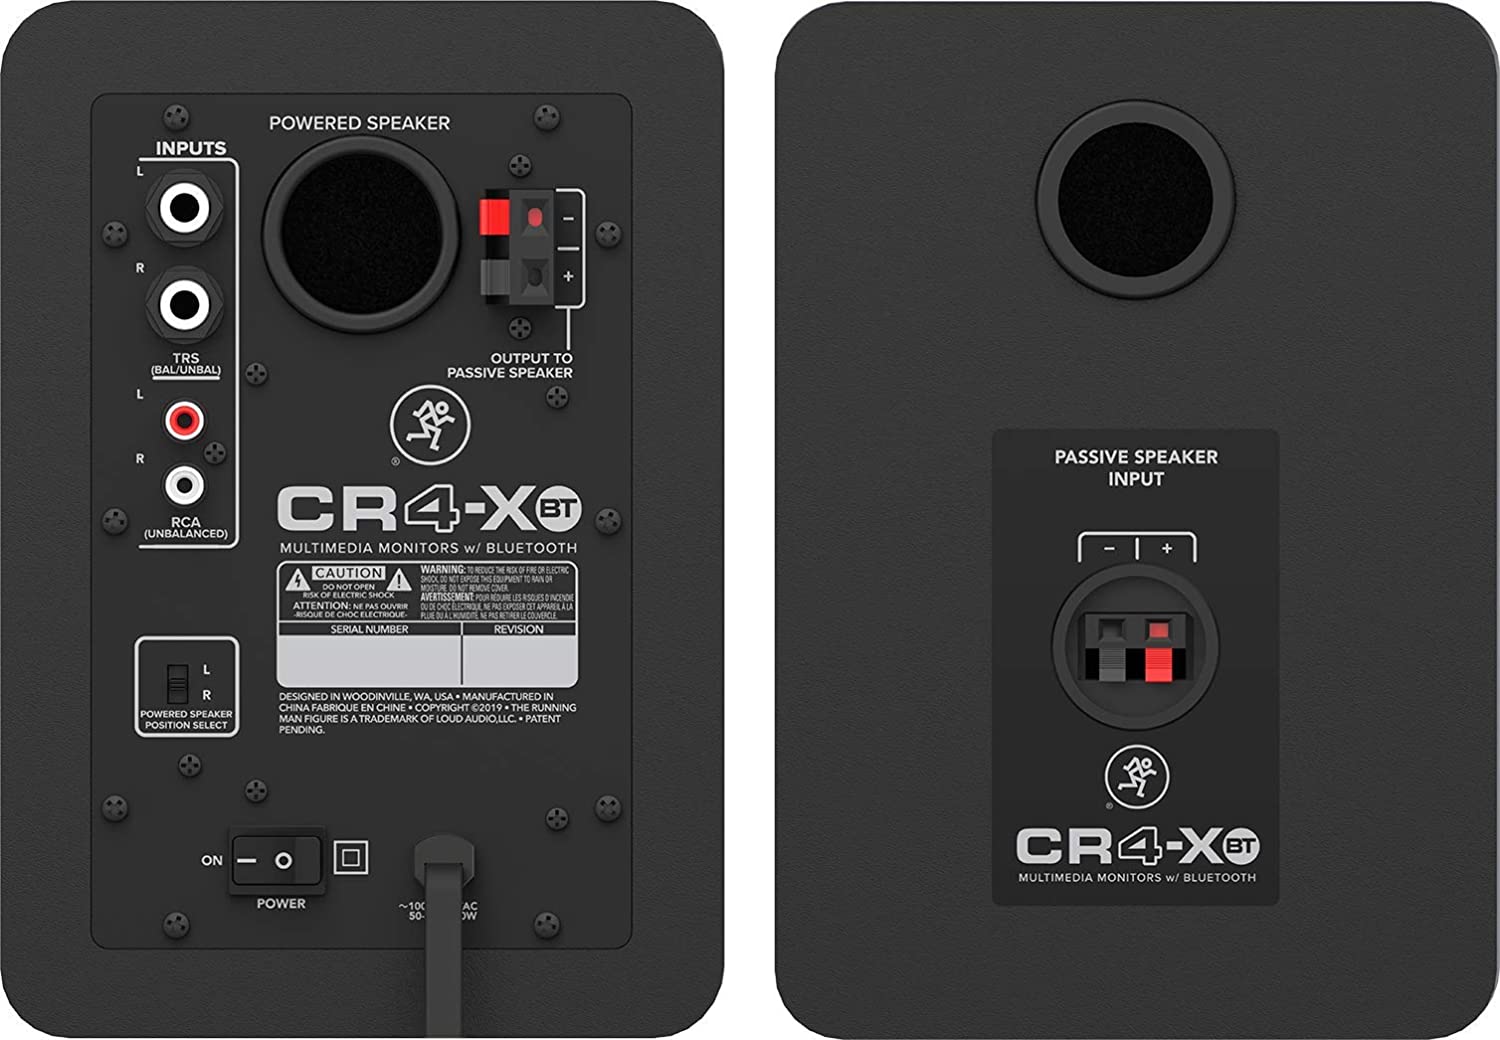 Mackie CR4-XBT (Pair) 4" Multimedia Powered Monitors With Bluetooth